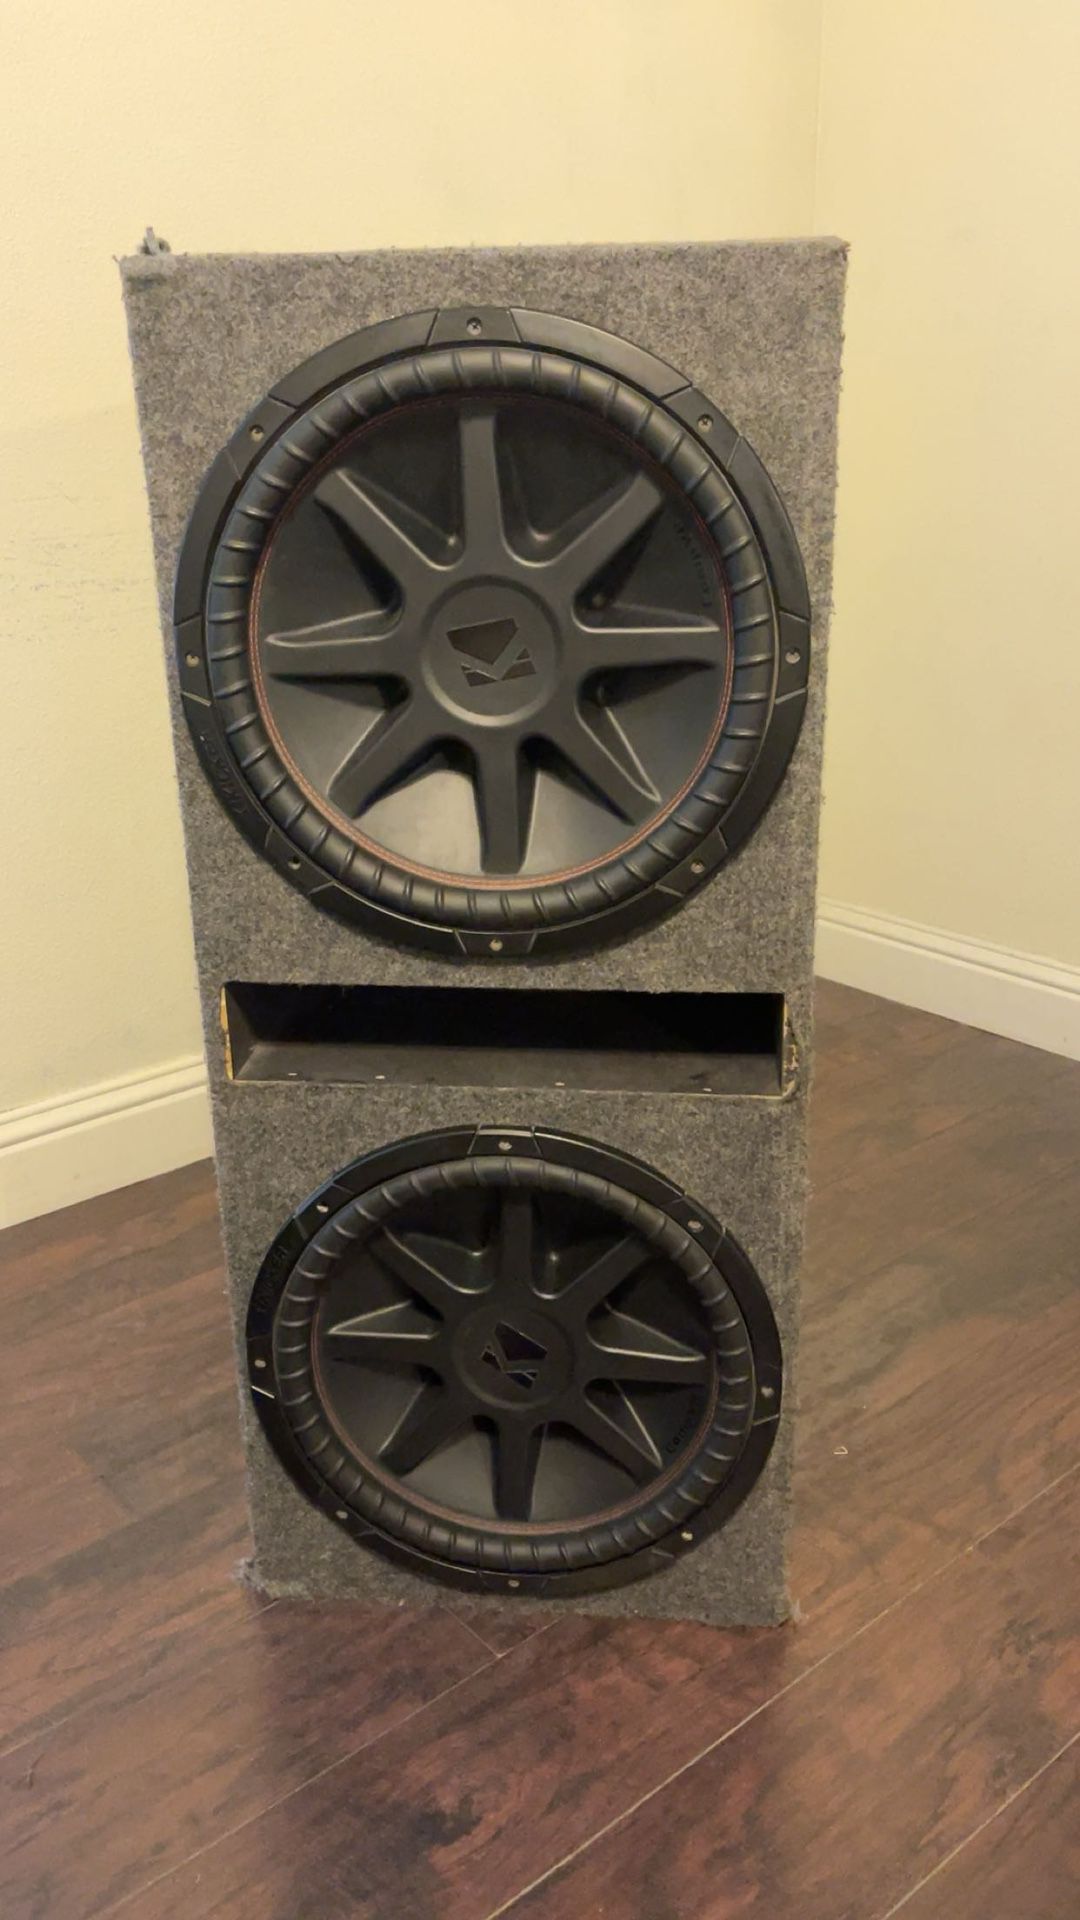 2 15s Subwoofers Sound System